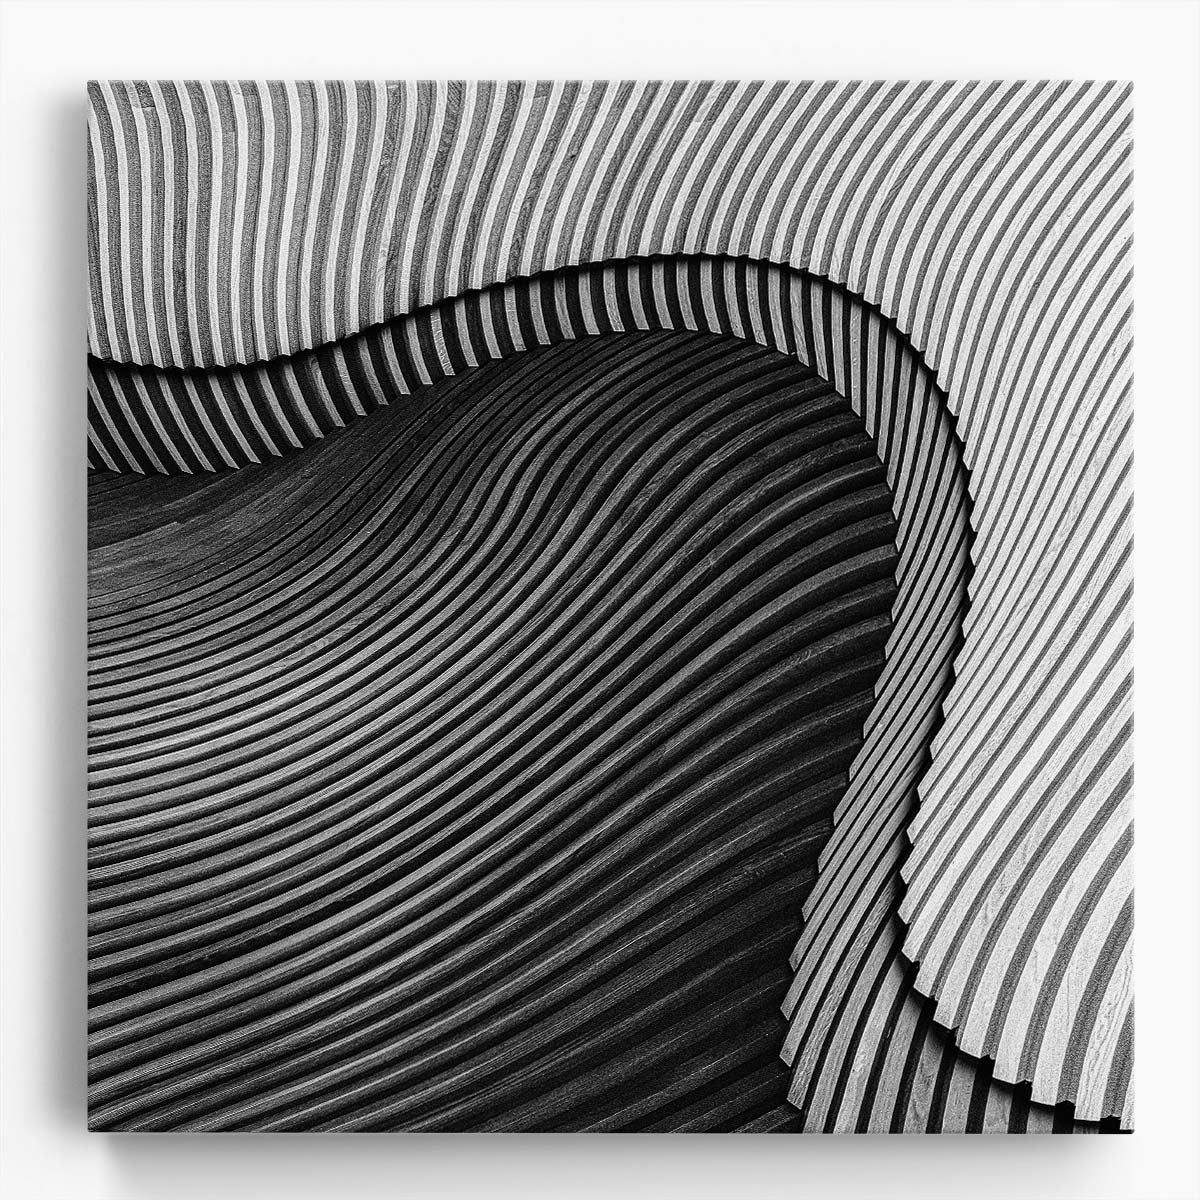 Abstract Monochrome Waves Curved Wood Photography Wall Art by Luxuriance Designs. Made in USA.